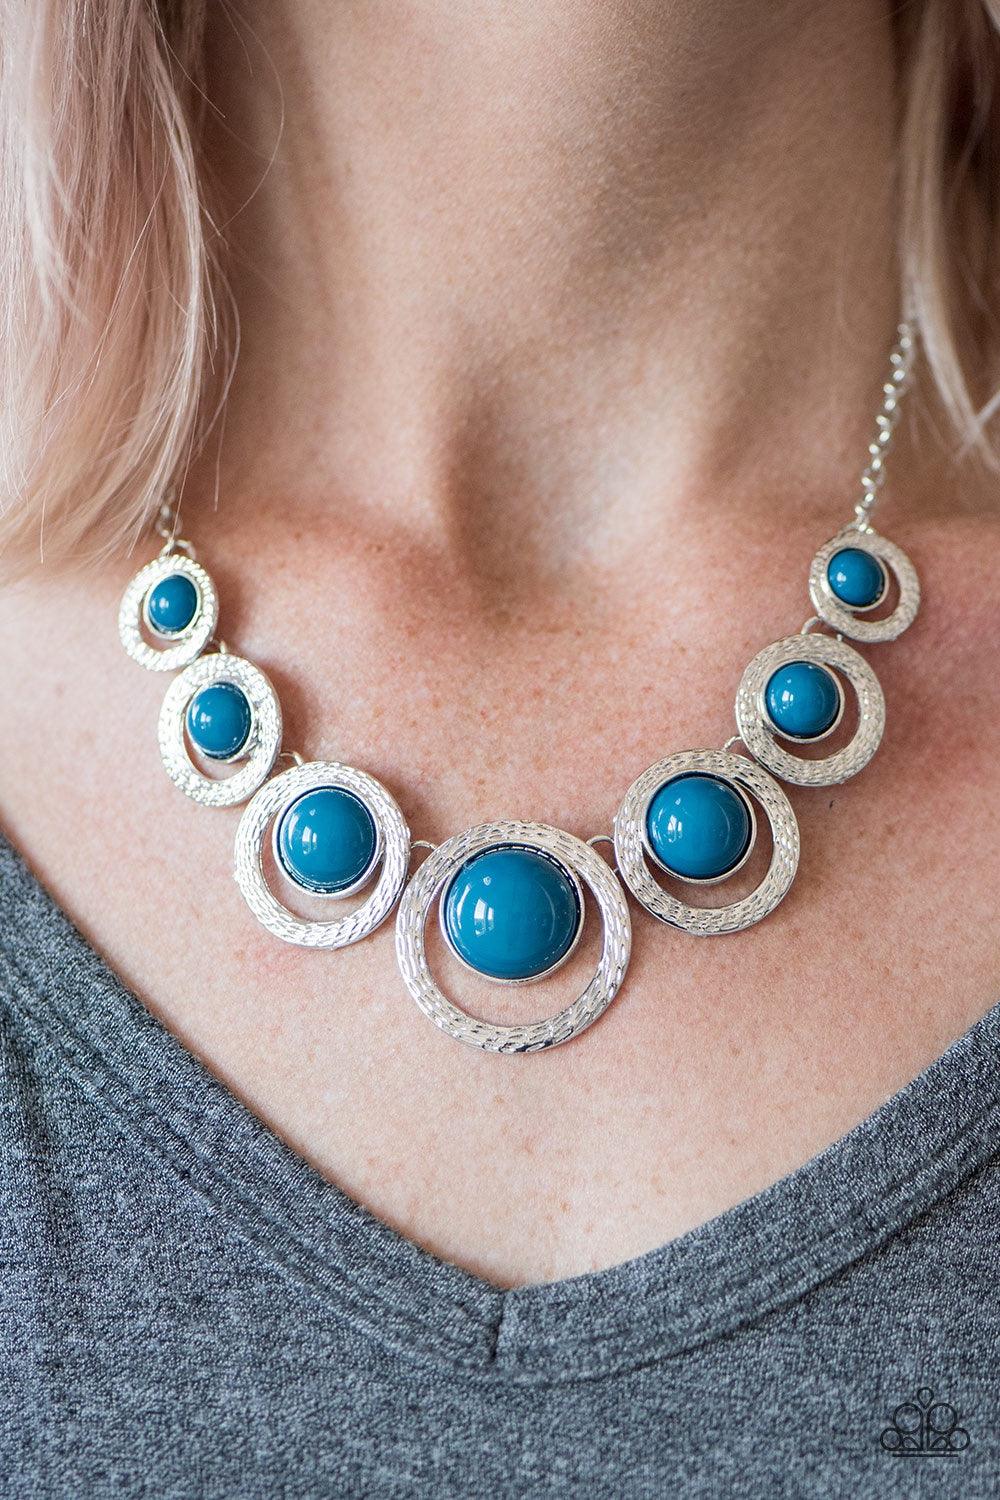 Paparazzi Accessories Jungle River - Blue Refreshing blue beads are pressed into the centers of delicately hammered silver frames, creating colorful accents below the collar. The shiny blue beads gradually increase in size as they near the center, adding